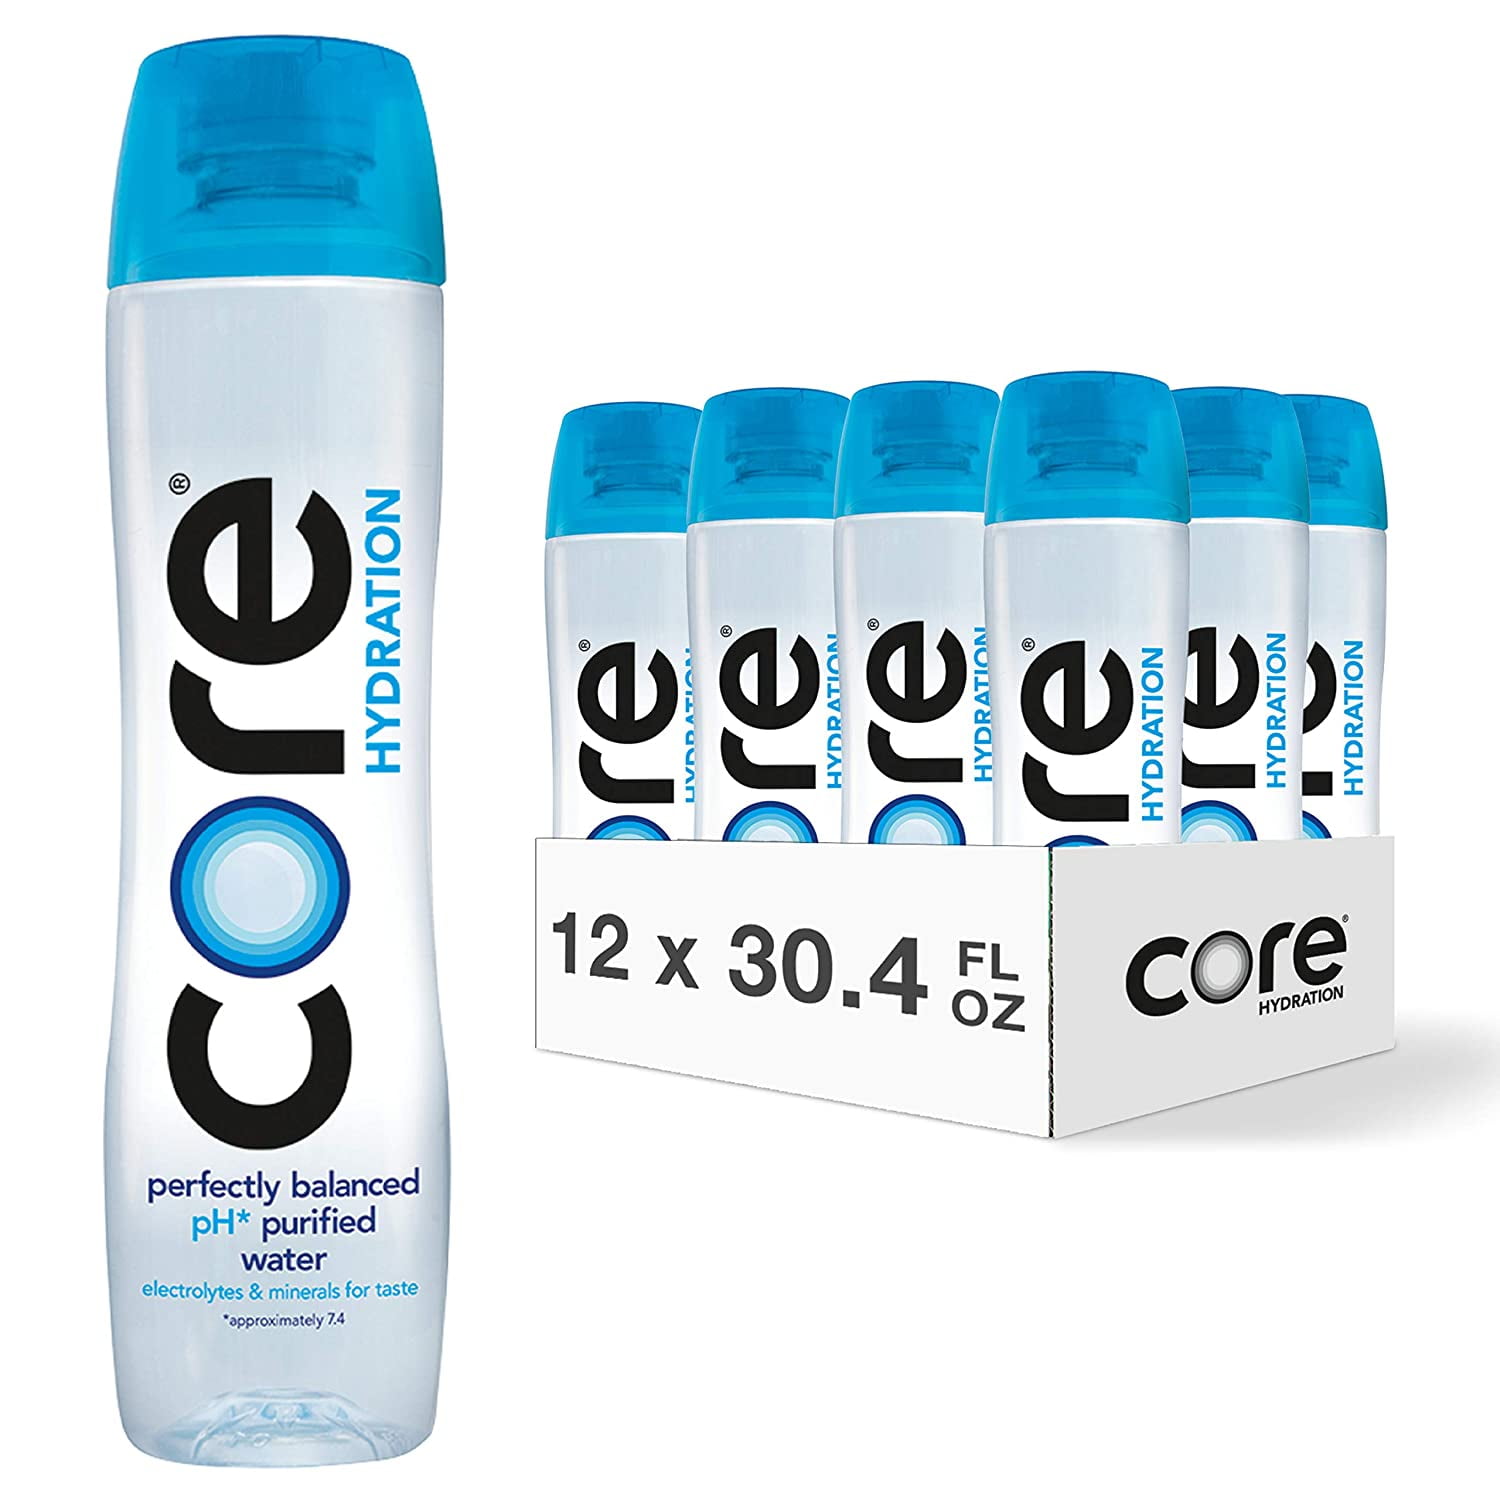 Core® Hydration Purified Bottled Water, 12 bottles / 30.4 fl oz - Jay C  Food Stores